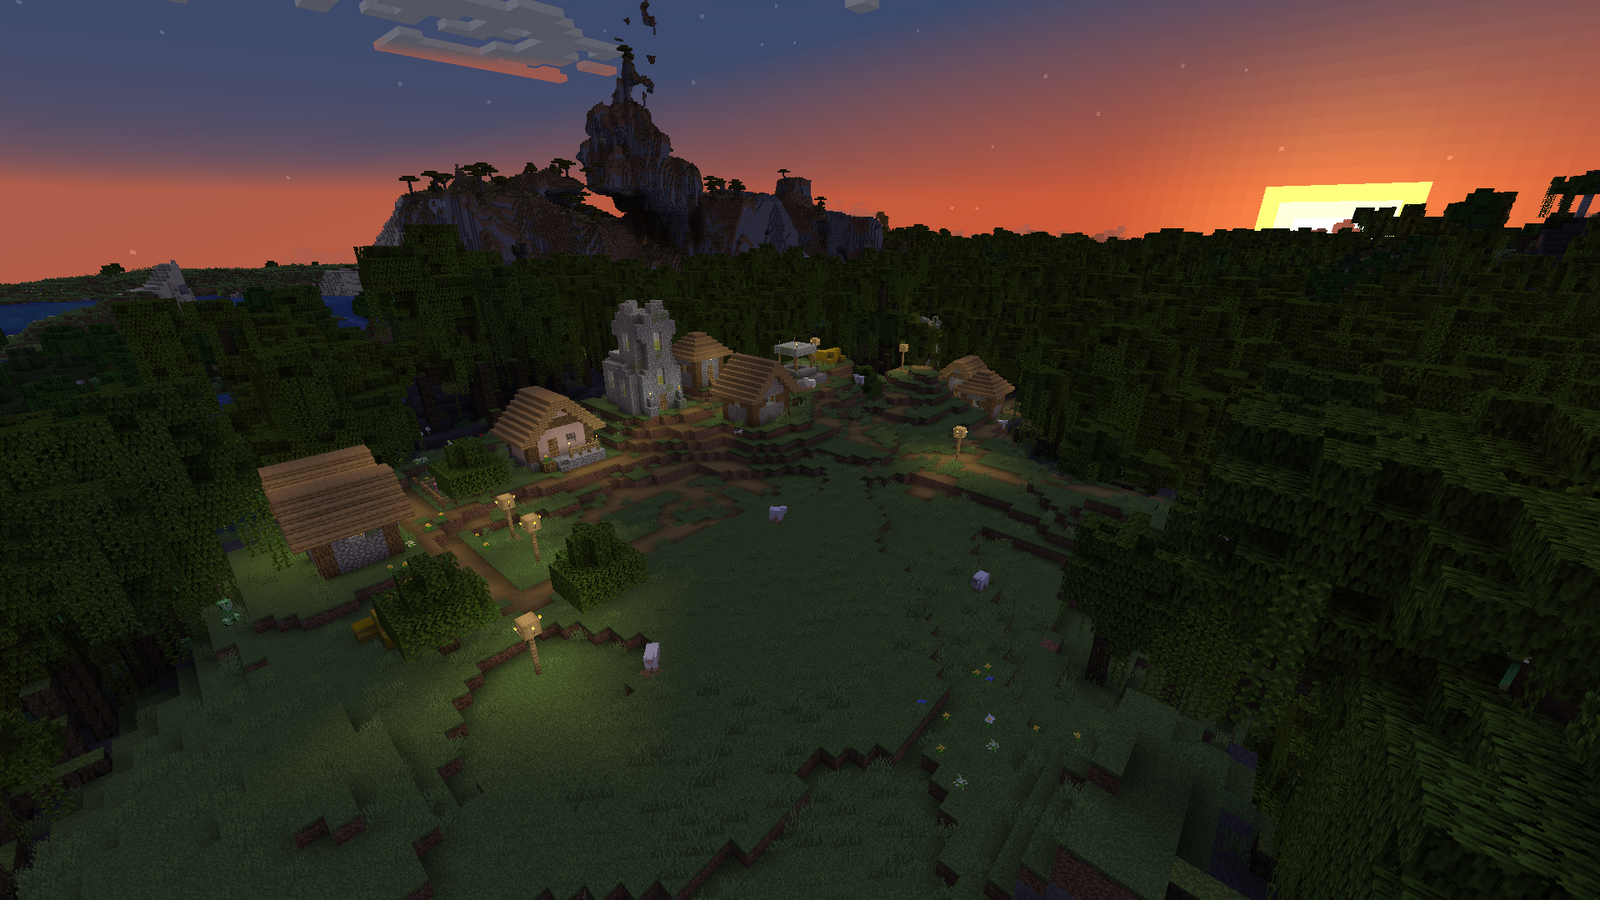 A Minecraft village, surrounded by swamp that looks very pretty in the sunset.